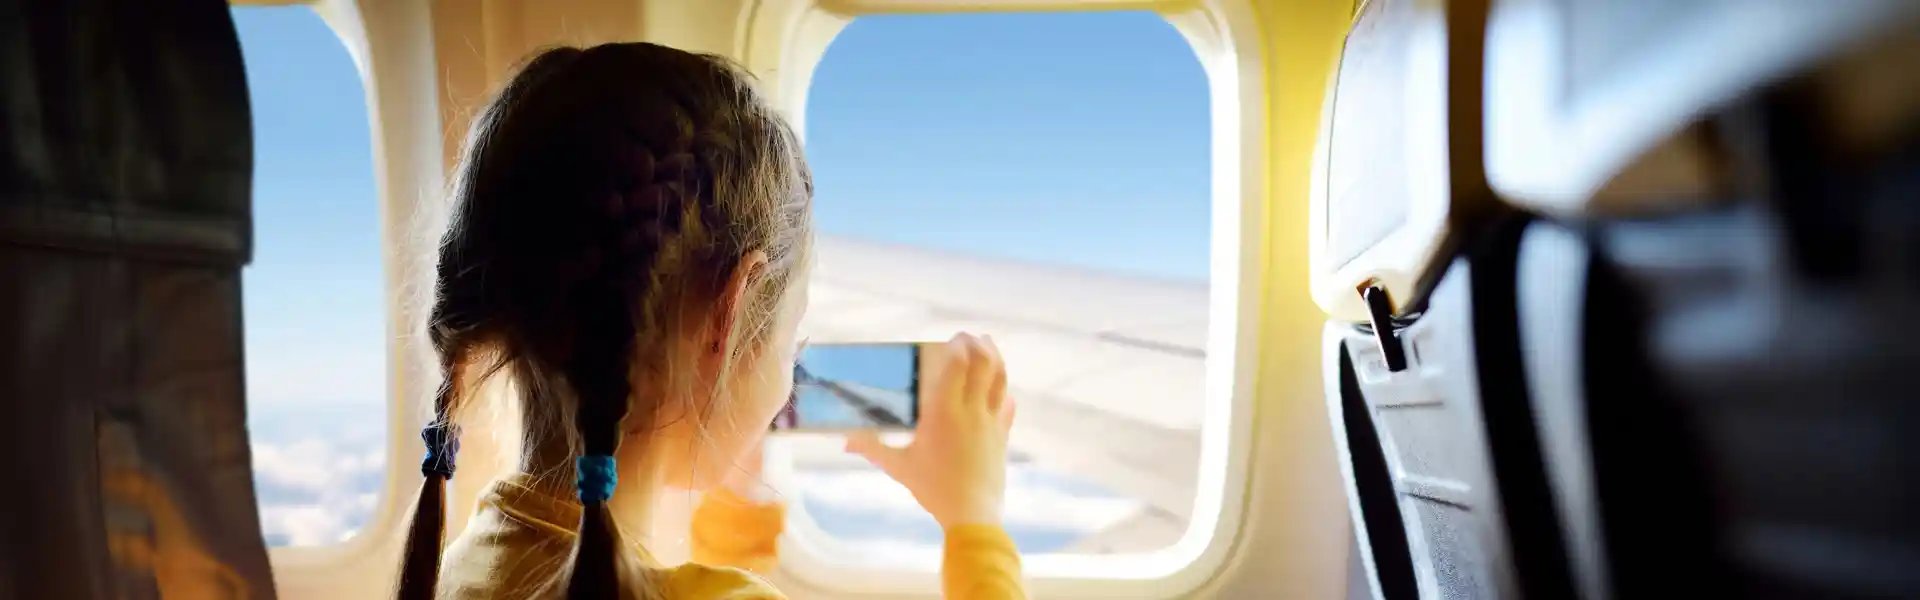 adorable-little-girl-traveling-by-an-airplane